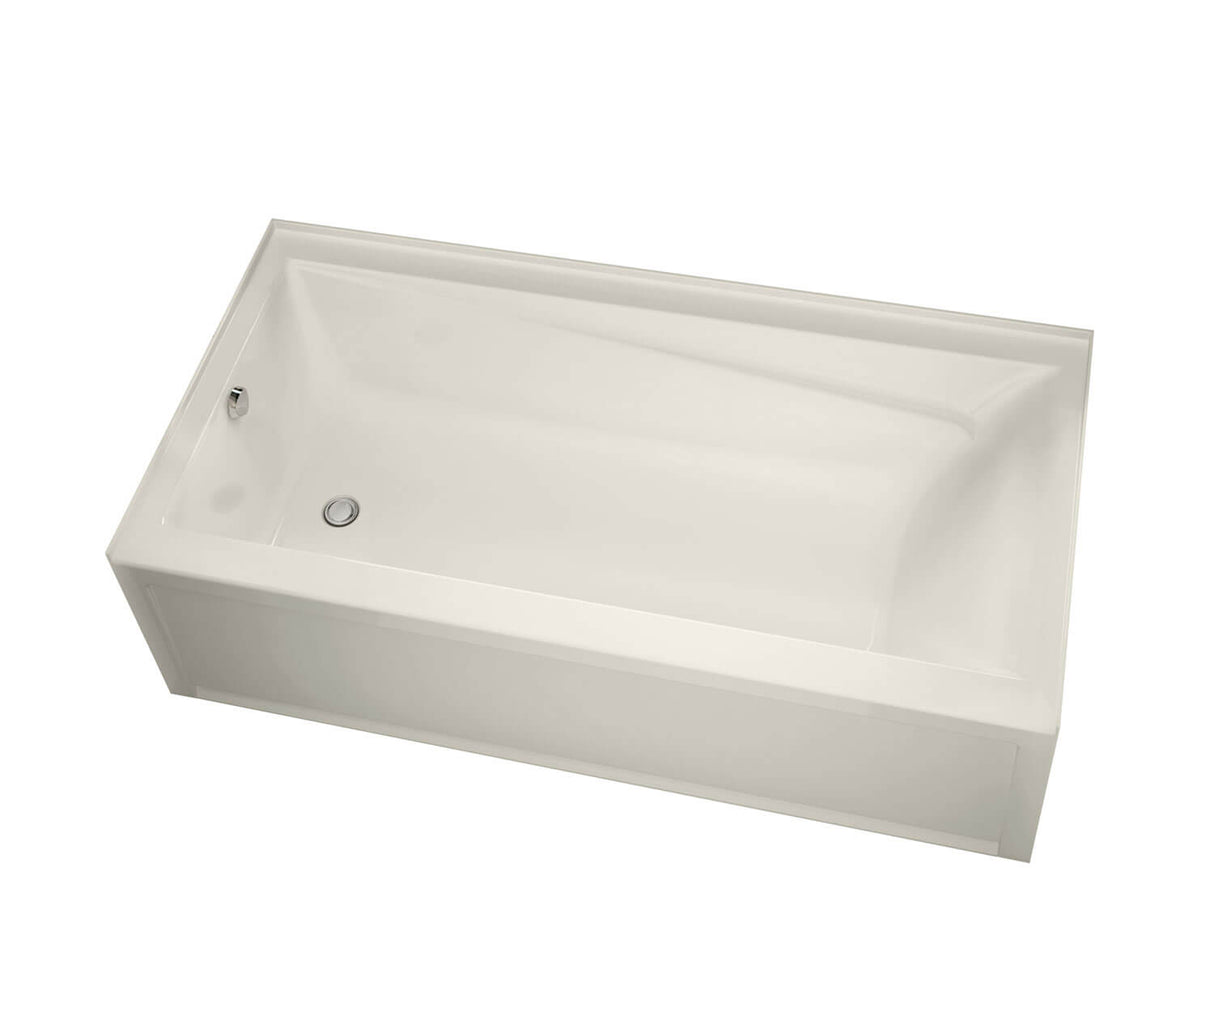 MAAX 105512-L-097-007 Exhibit 6032 IFS AFR Acrylic Alcove Left-Hand Drain Combined Whirlpool & Aeroeffect Bathtub in Biscuit